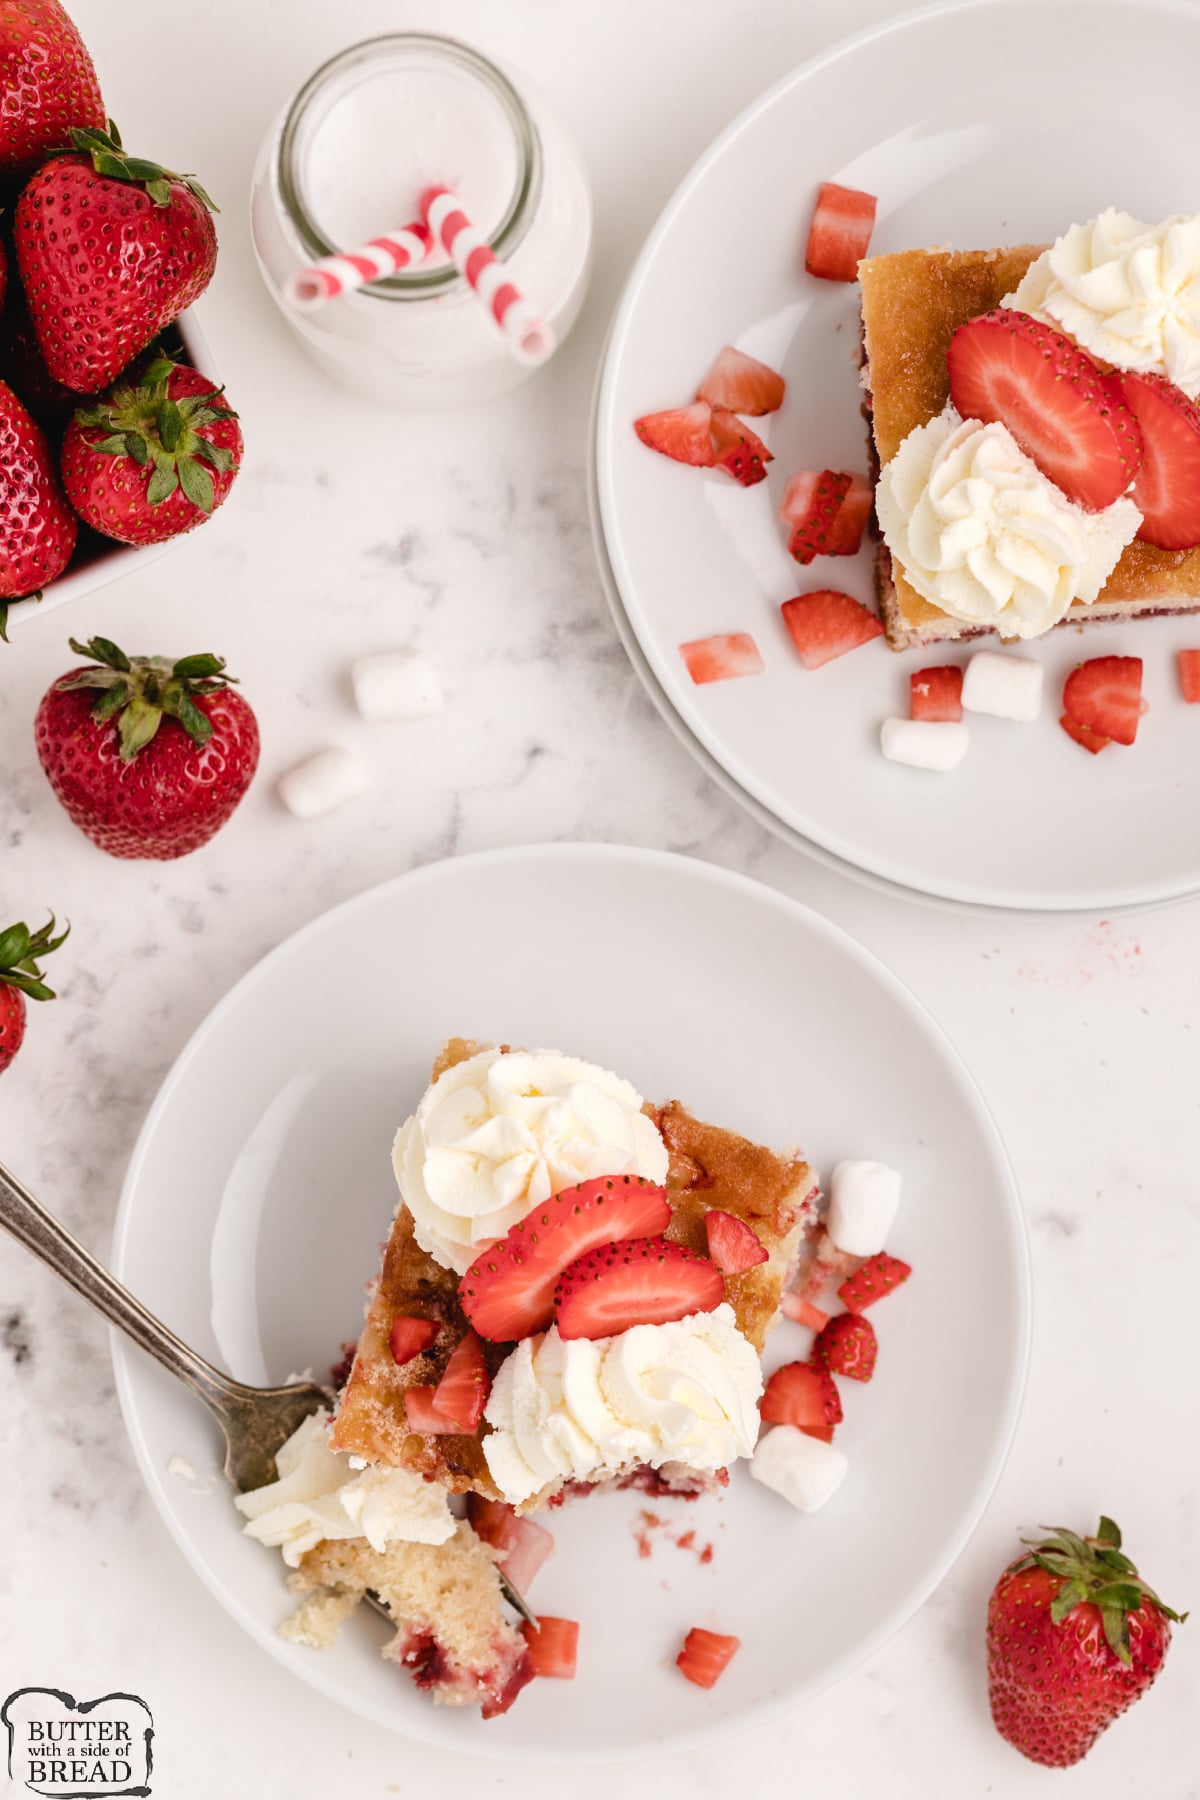 Marshmallow Strawberry Shortcake is made with marshmallows, frozen strawberries and strawberry jello! This simple strawberry shortcake recipe is made completely from scratch and the strawberries are baked right into it.